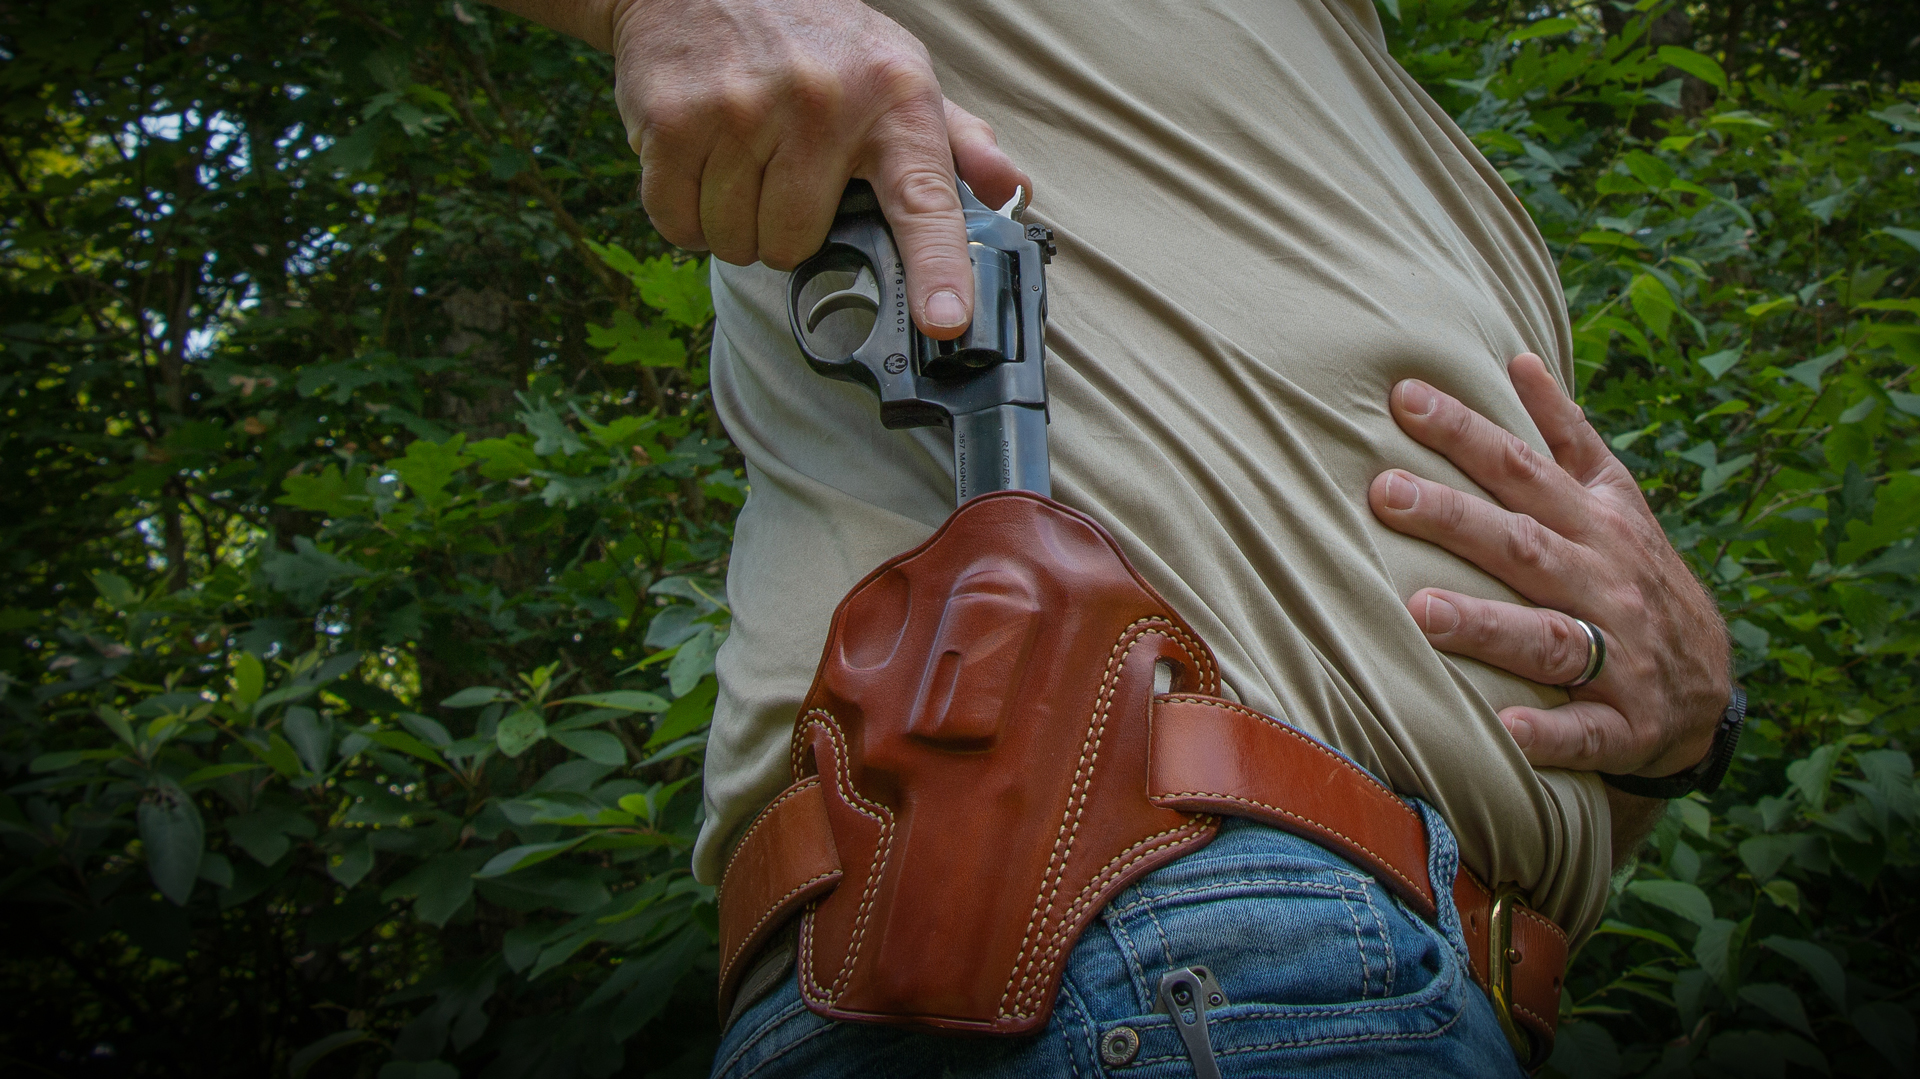 Is the .357 Magnum the Best Option for Personal Defense?